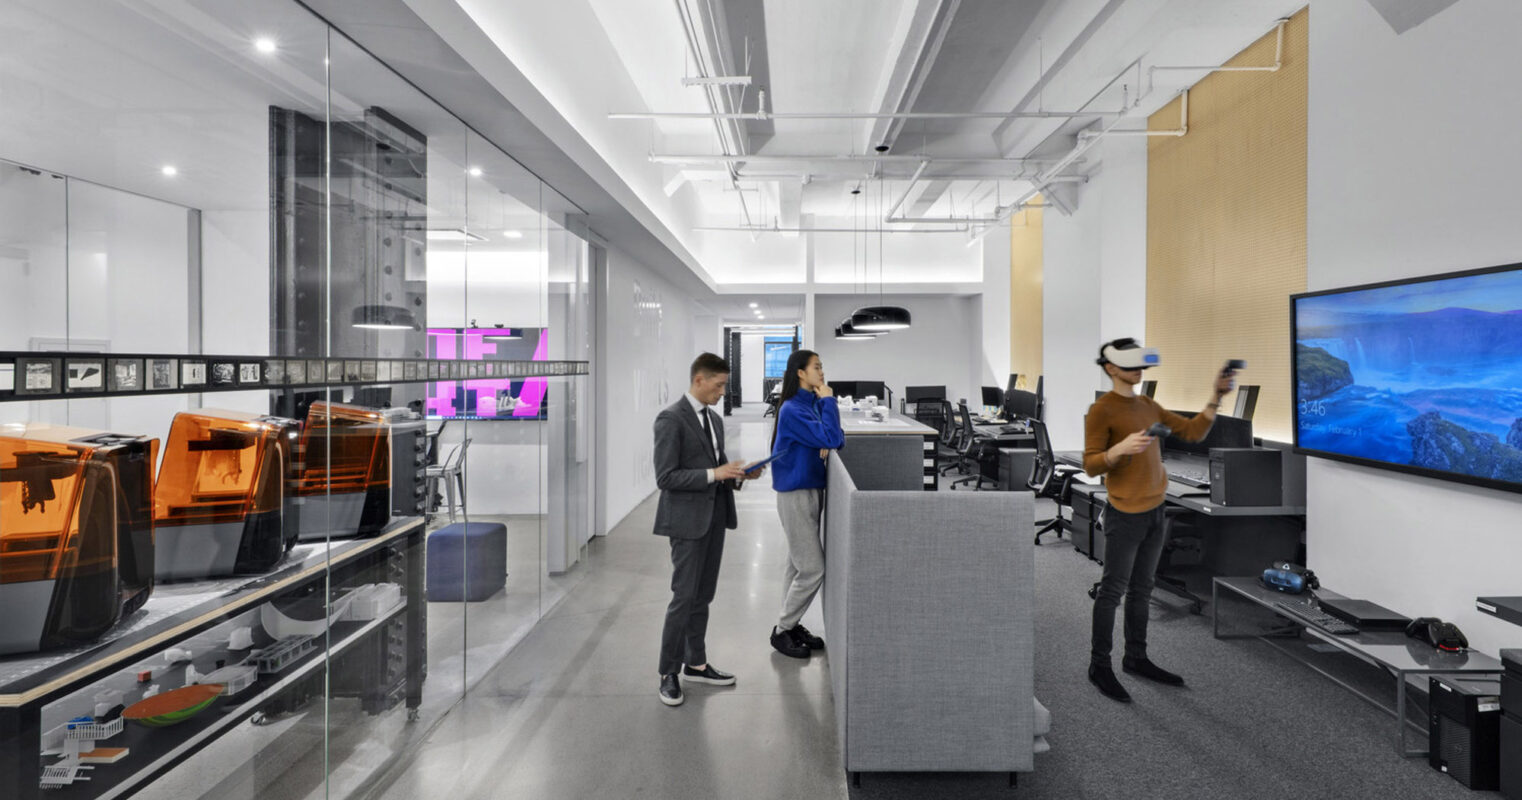 Modern office interior featuring vibrant orange 3D printers on the left, two professionals collaborating in the center, and a large blue-toned digital screen on the right wall, all under a neutral color palette with strategic pops of color.